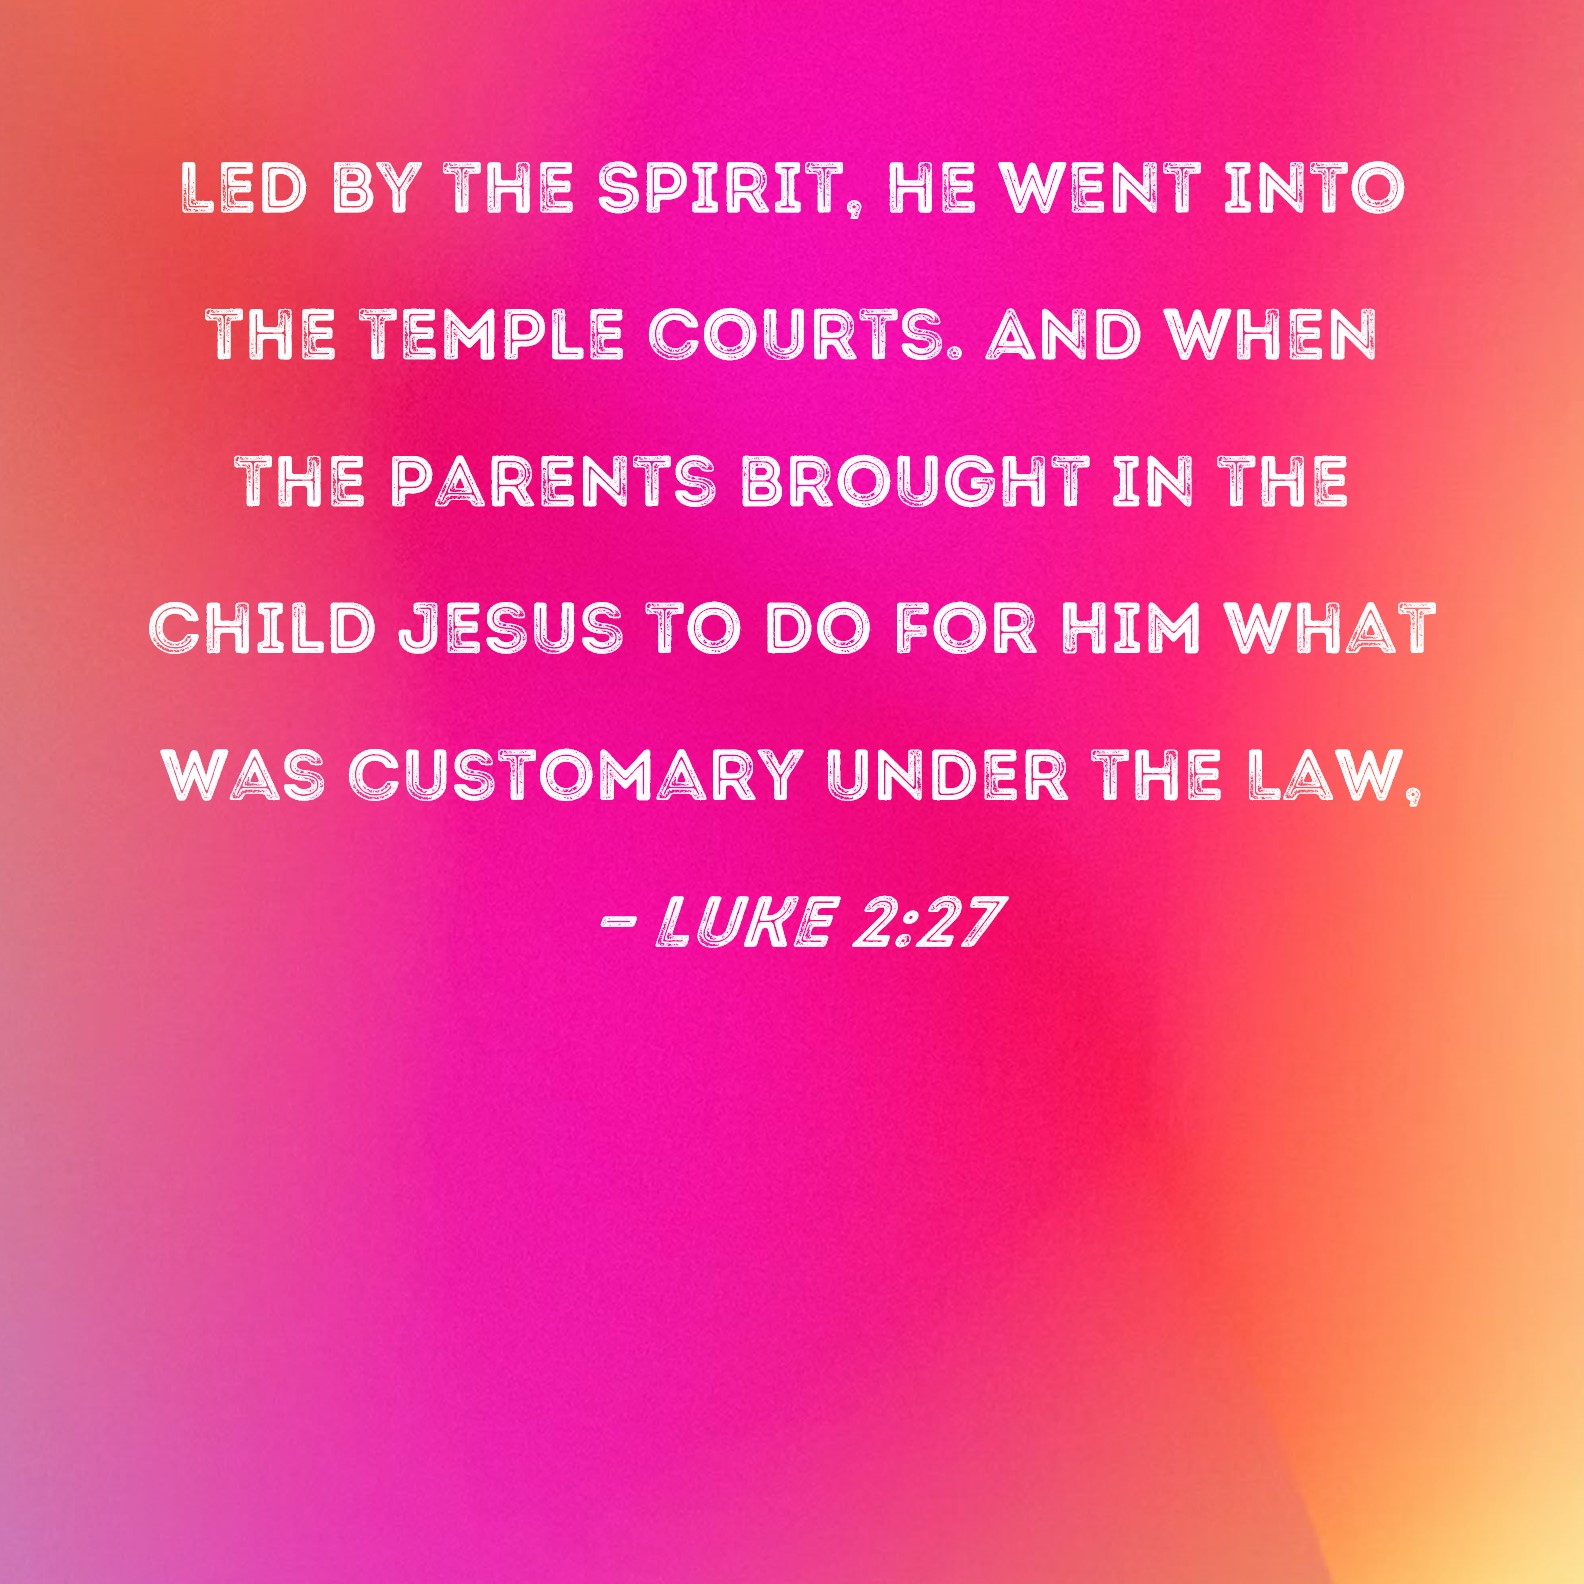 luke-2-27-led-by-the-spirit-he-went-into-the-temple-courts-and-when